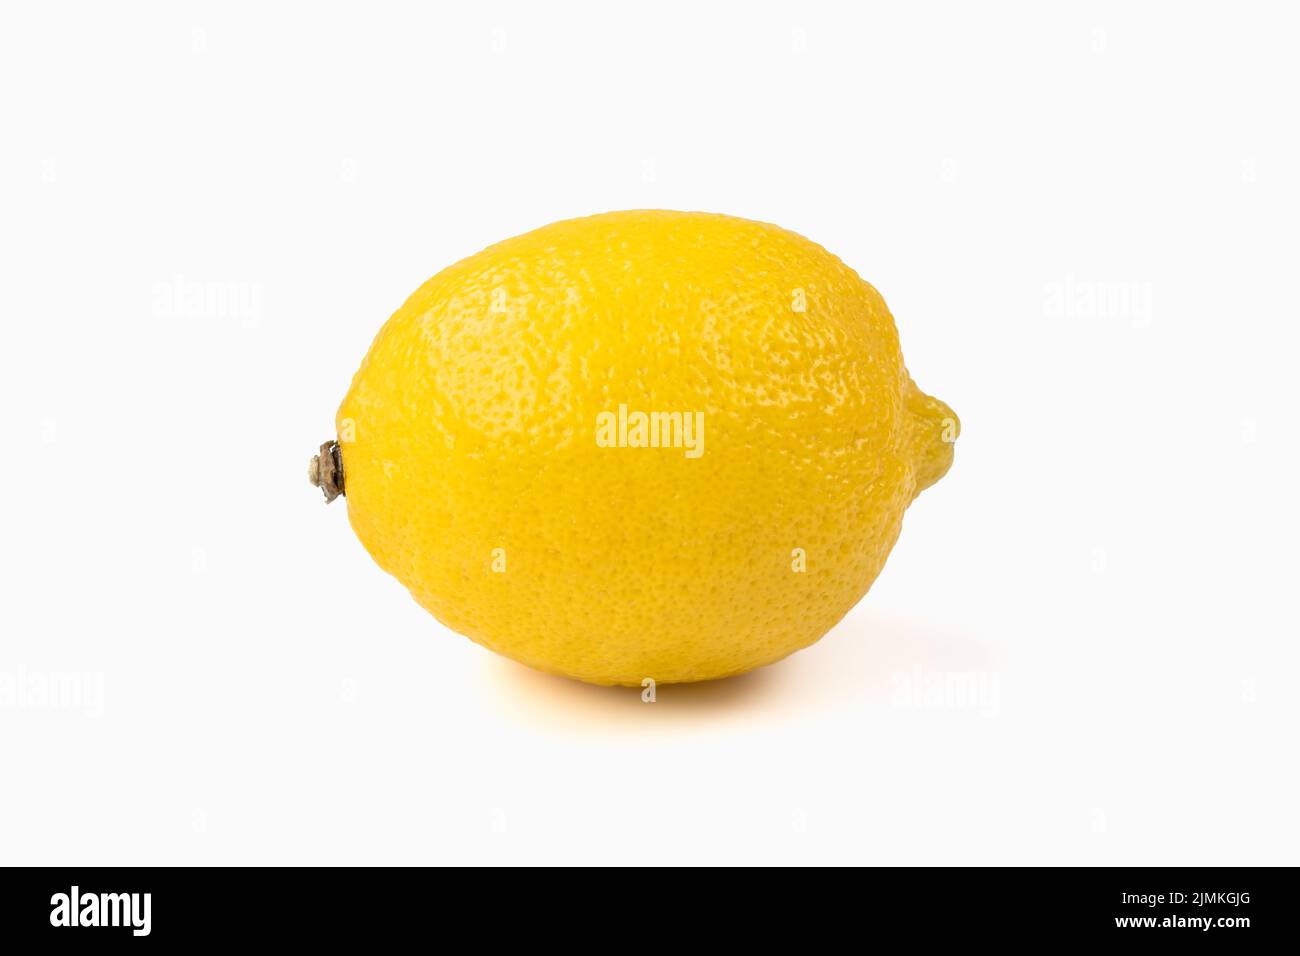 Fresh yellow lemon isolated on bright background. Close up view. Stock Photo